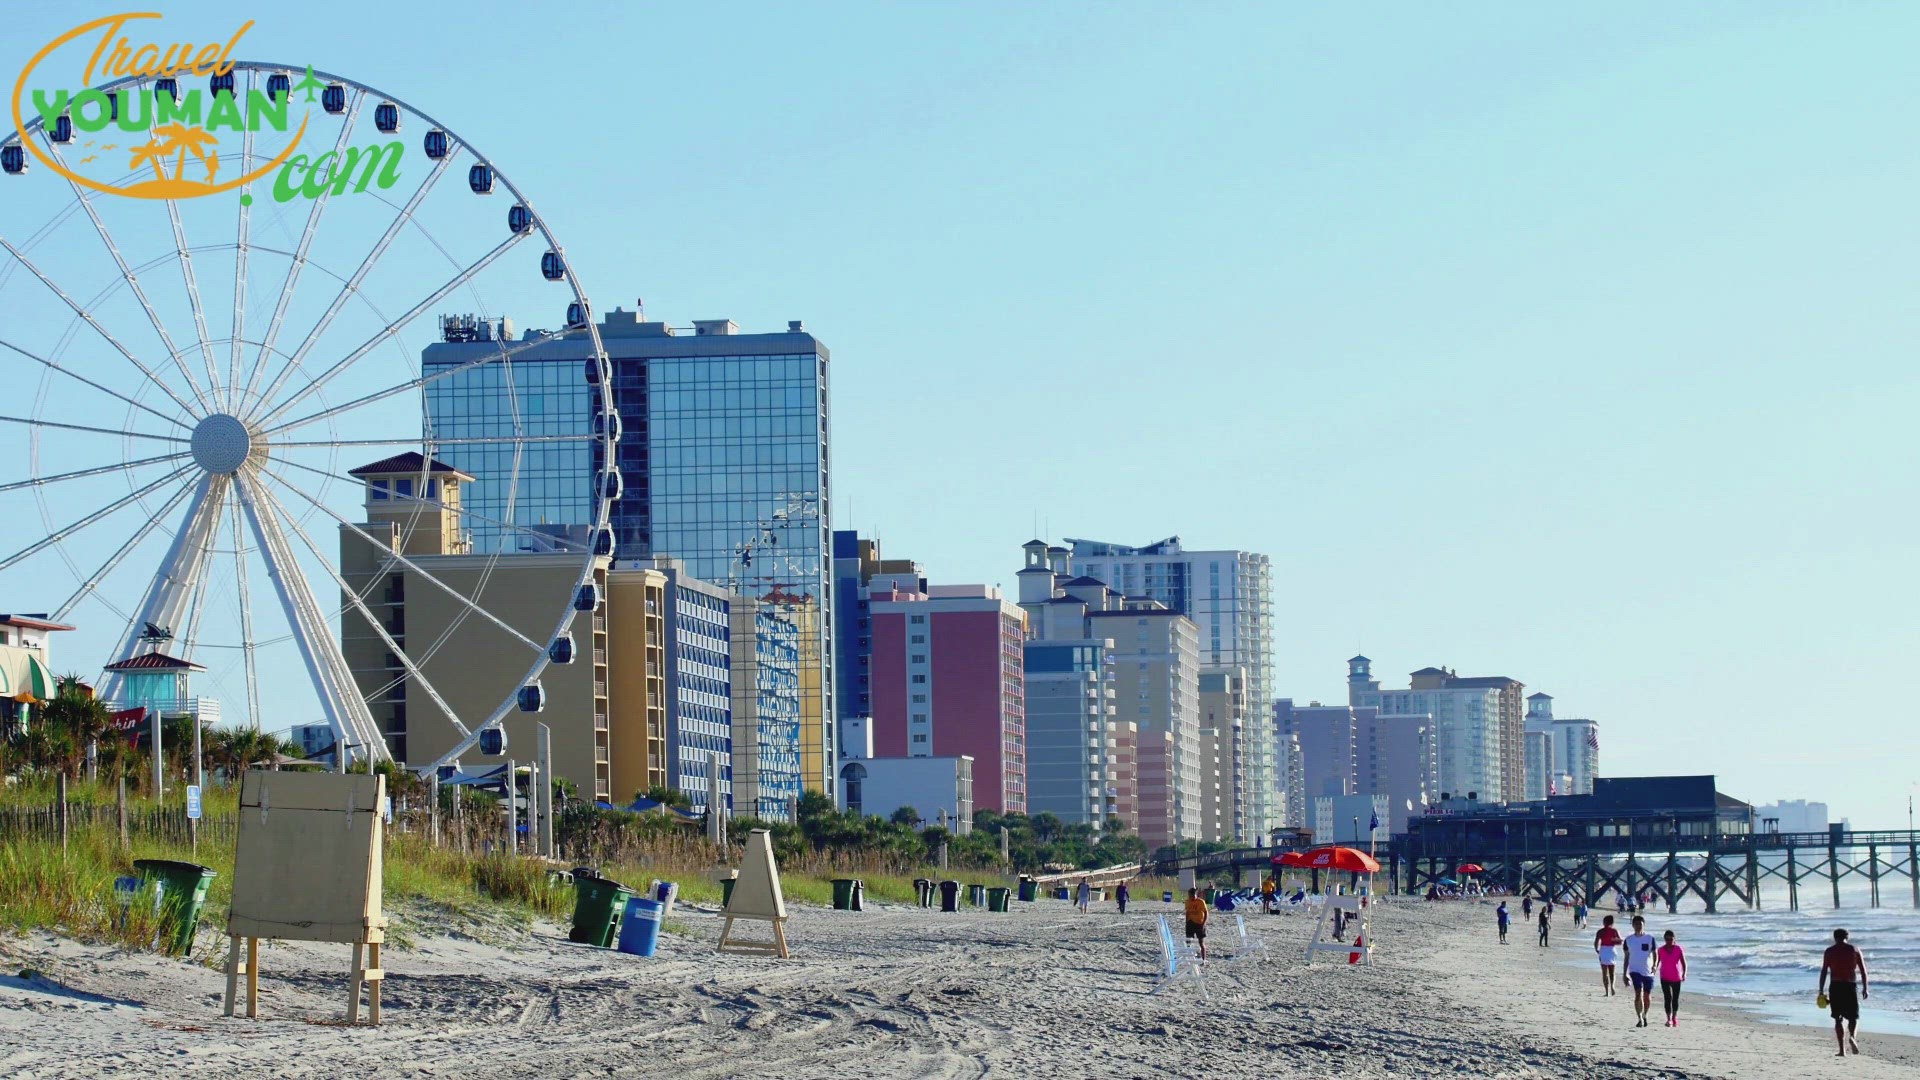 'Video thumbnail for Atmosphere in Myrtle Beach'